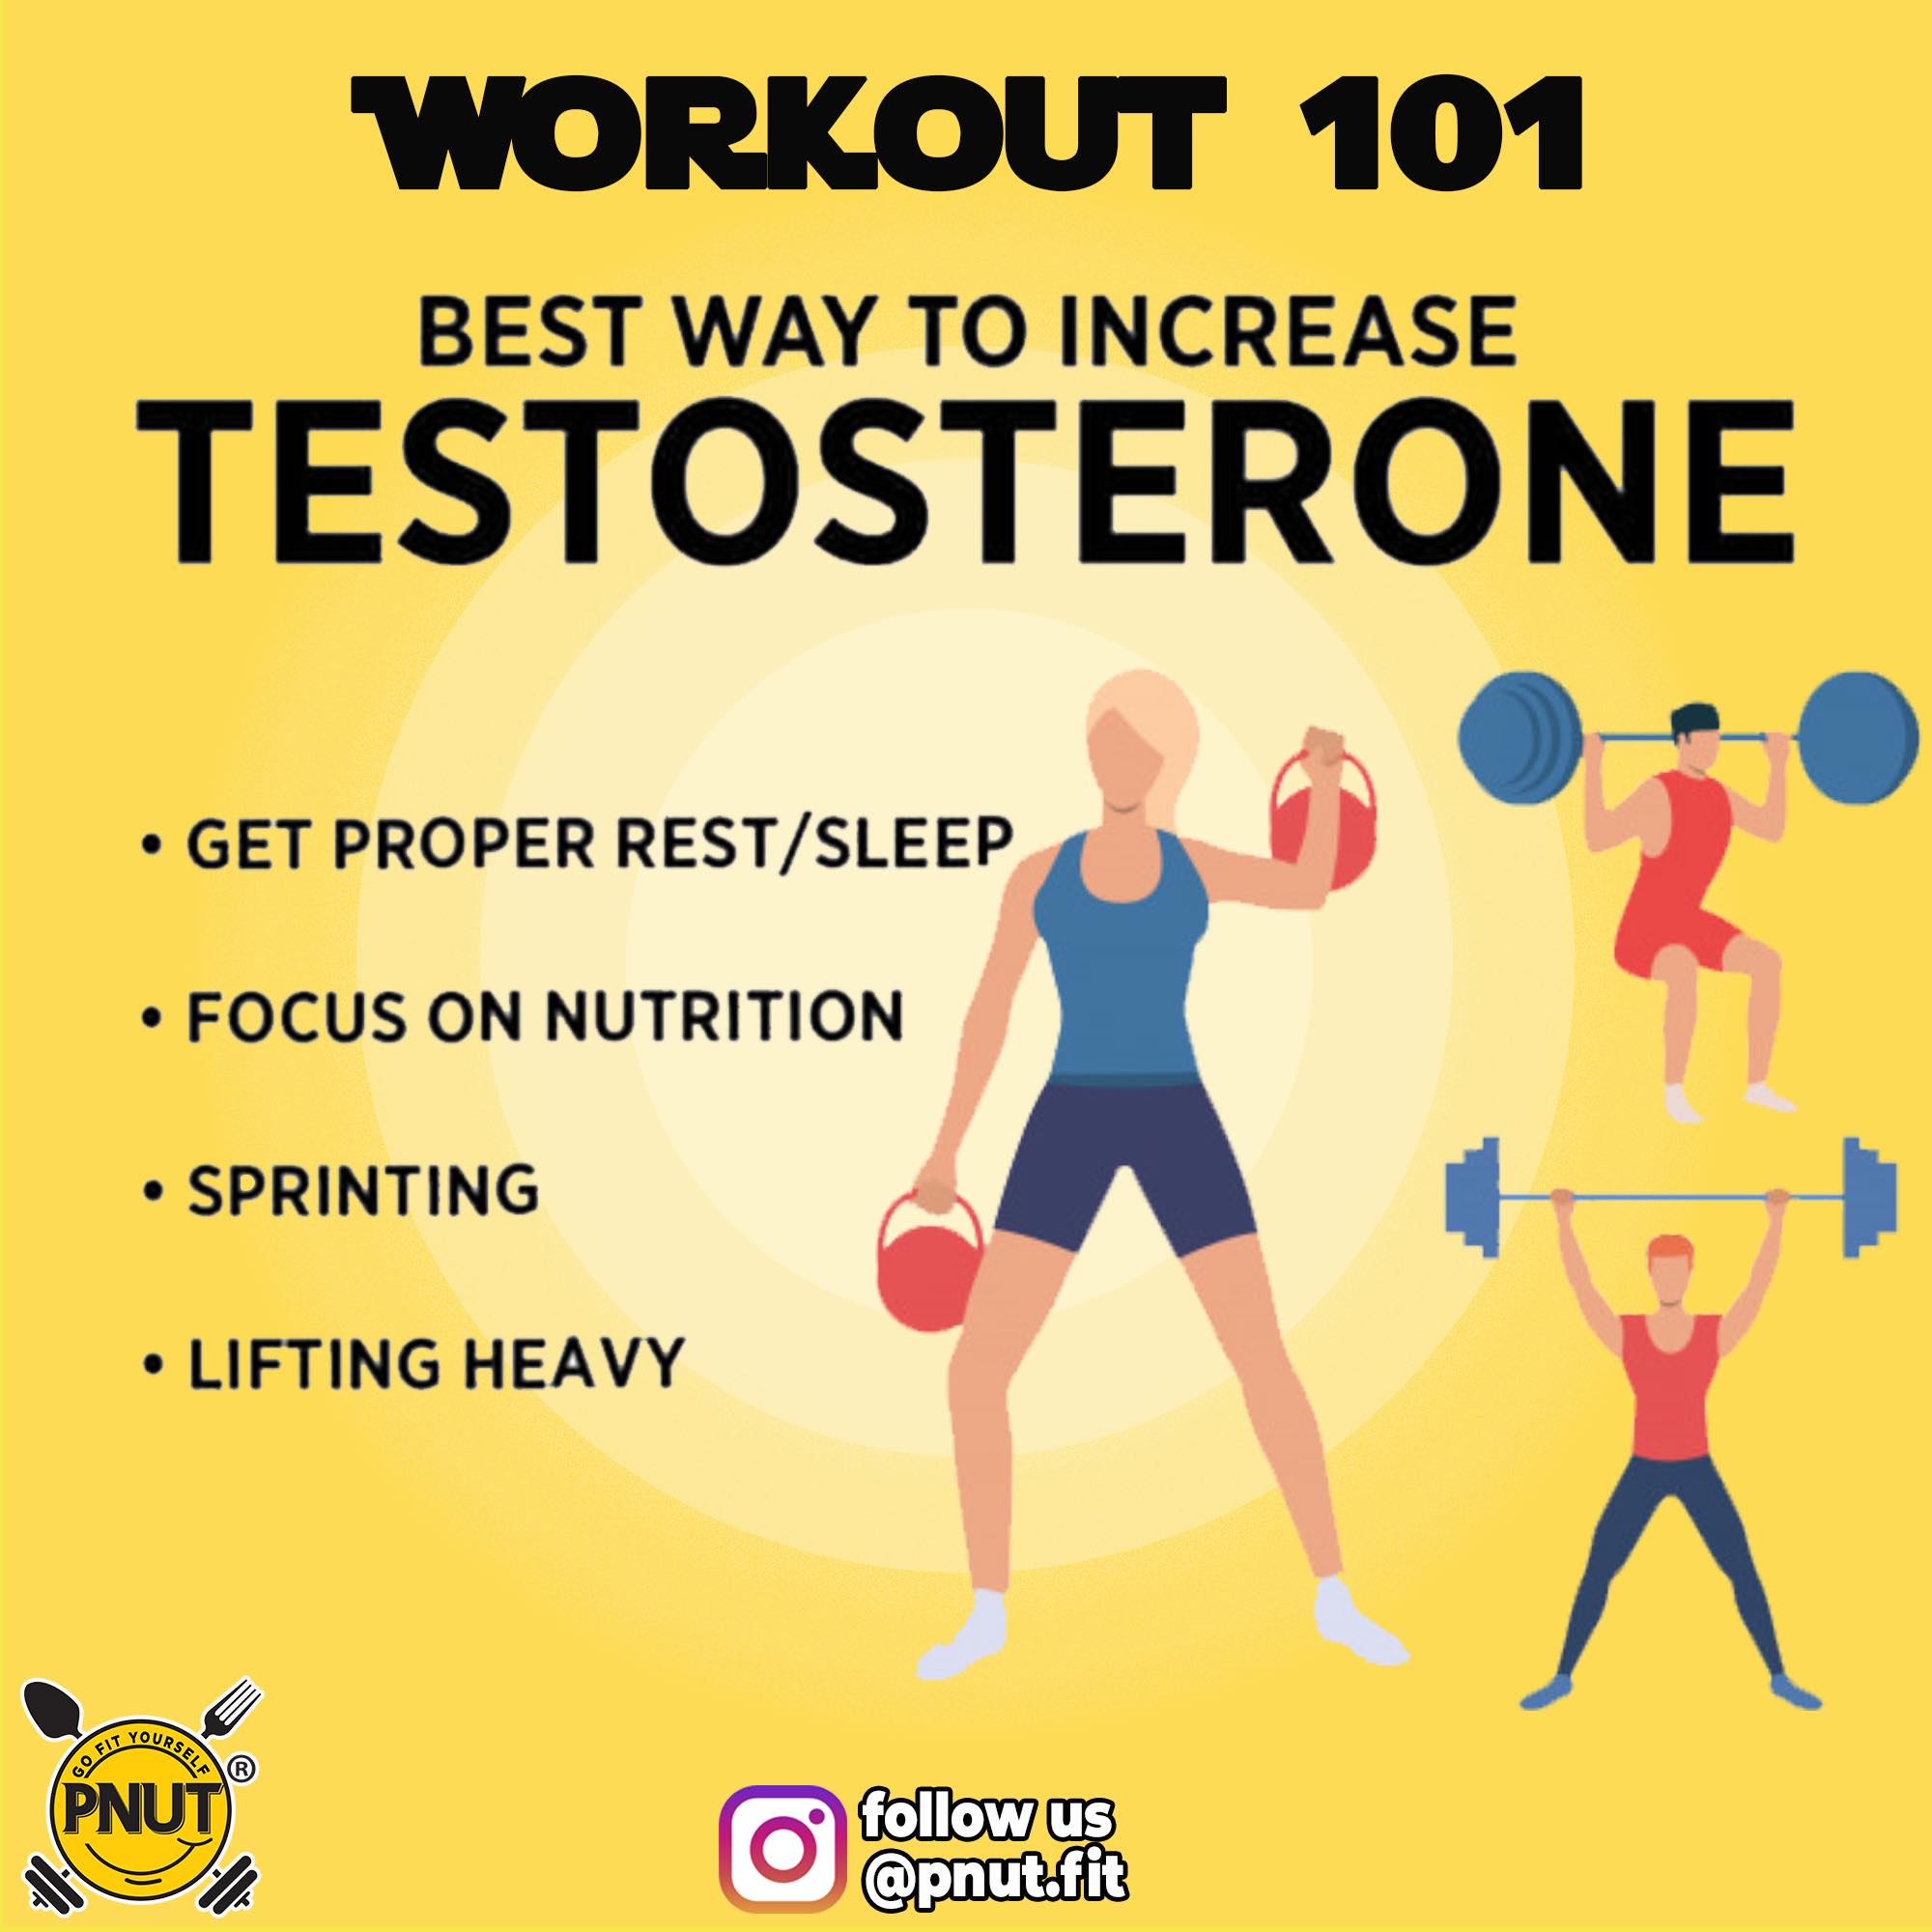 The importance of Testosterone & how to increase it naturally.